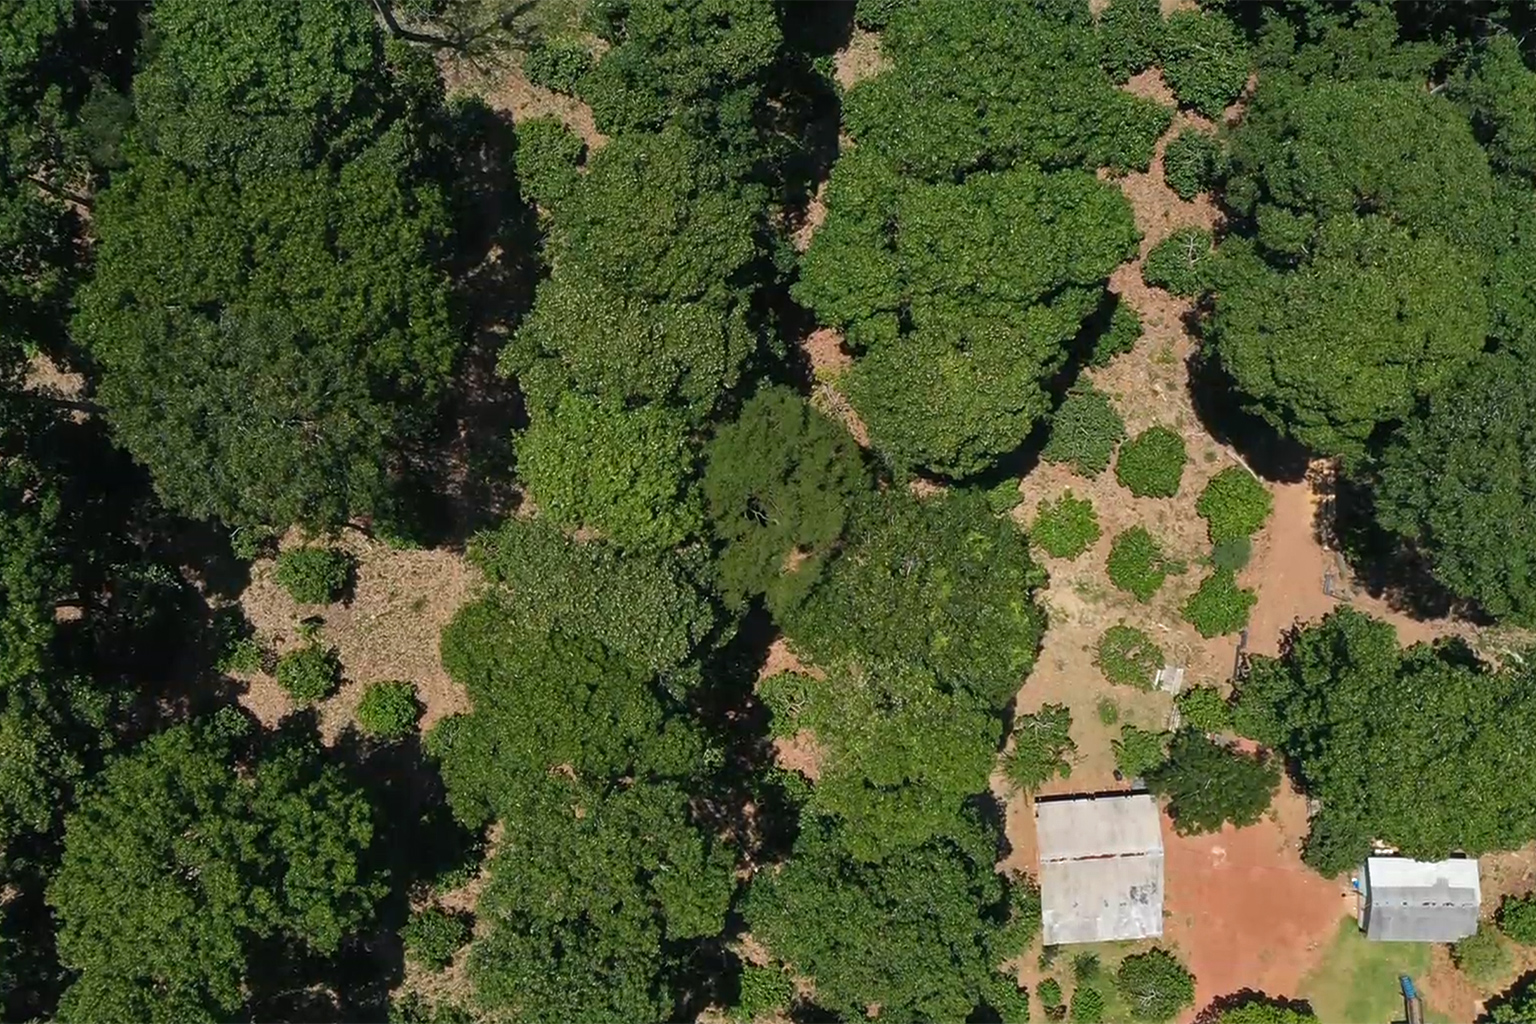 Drone image of the agroforestry farming land.